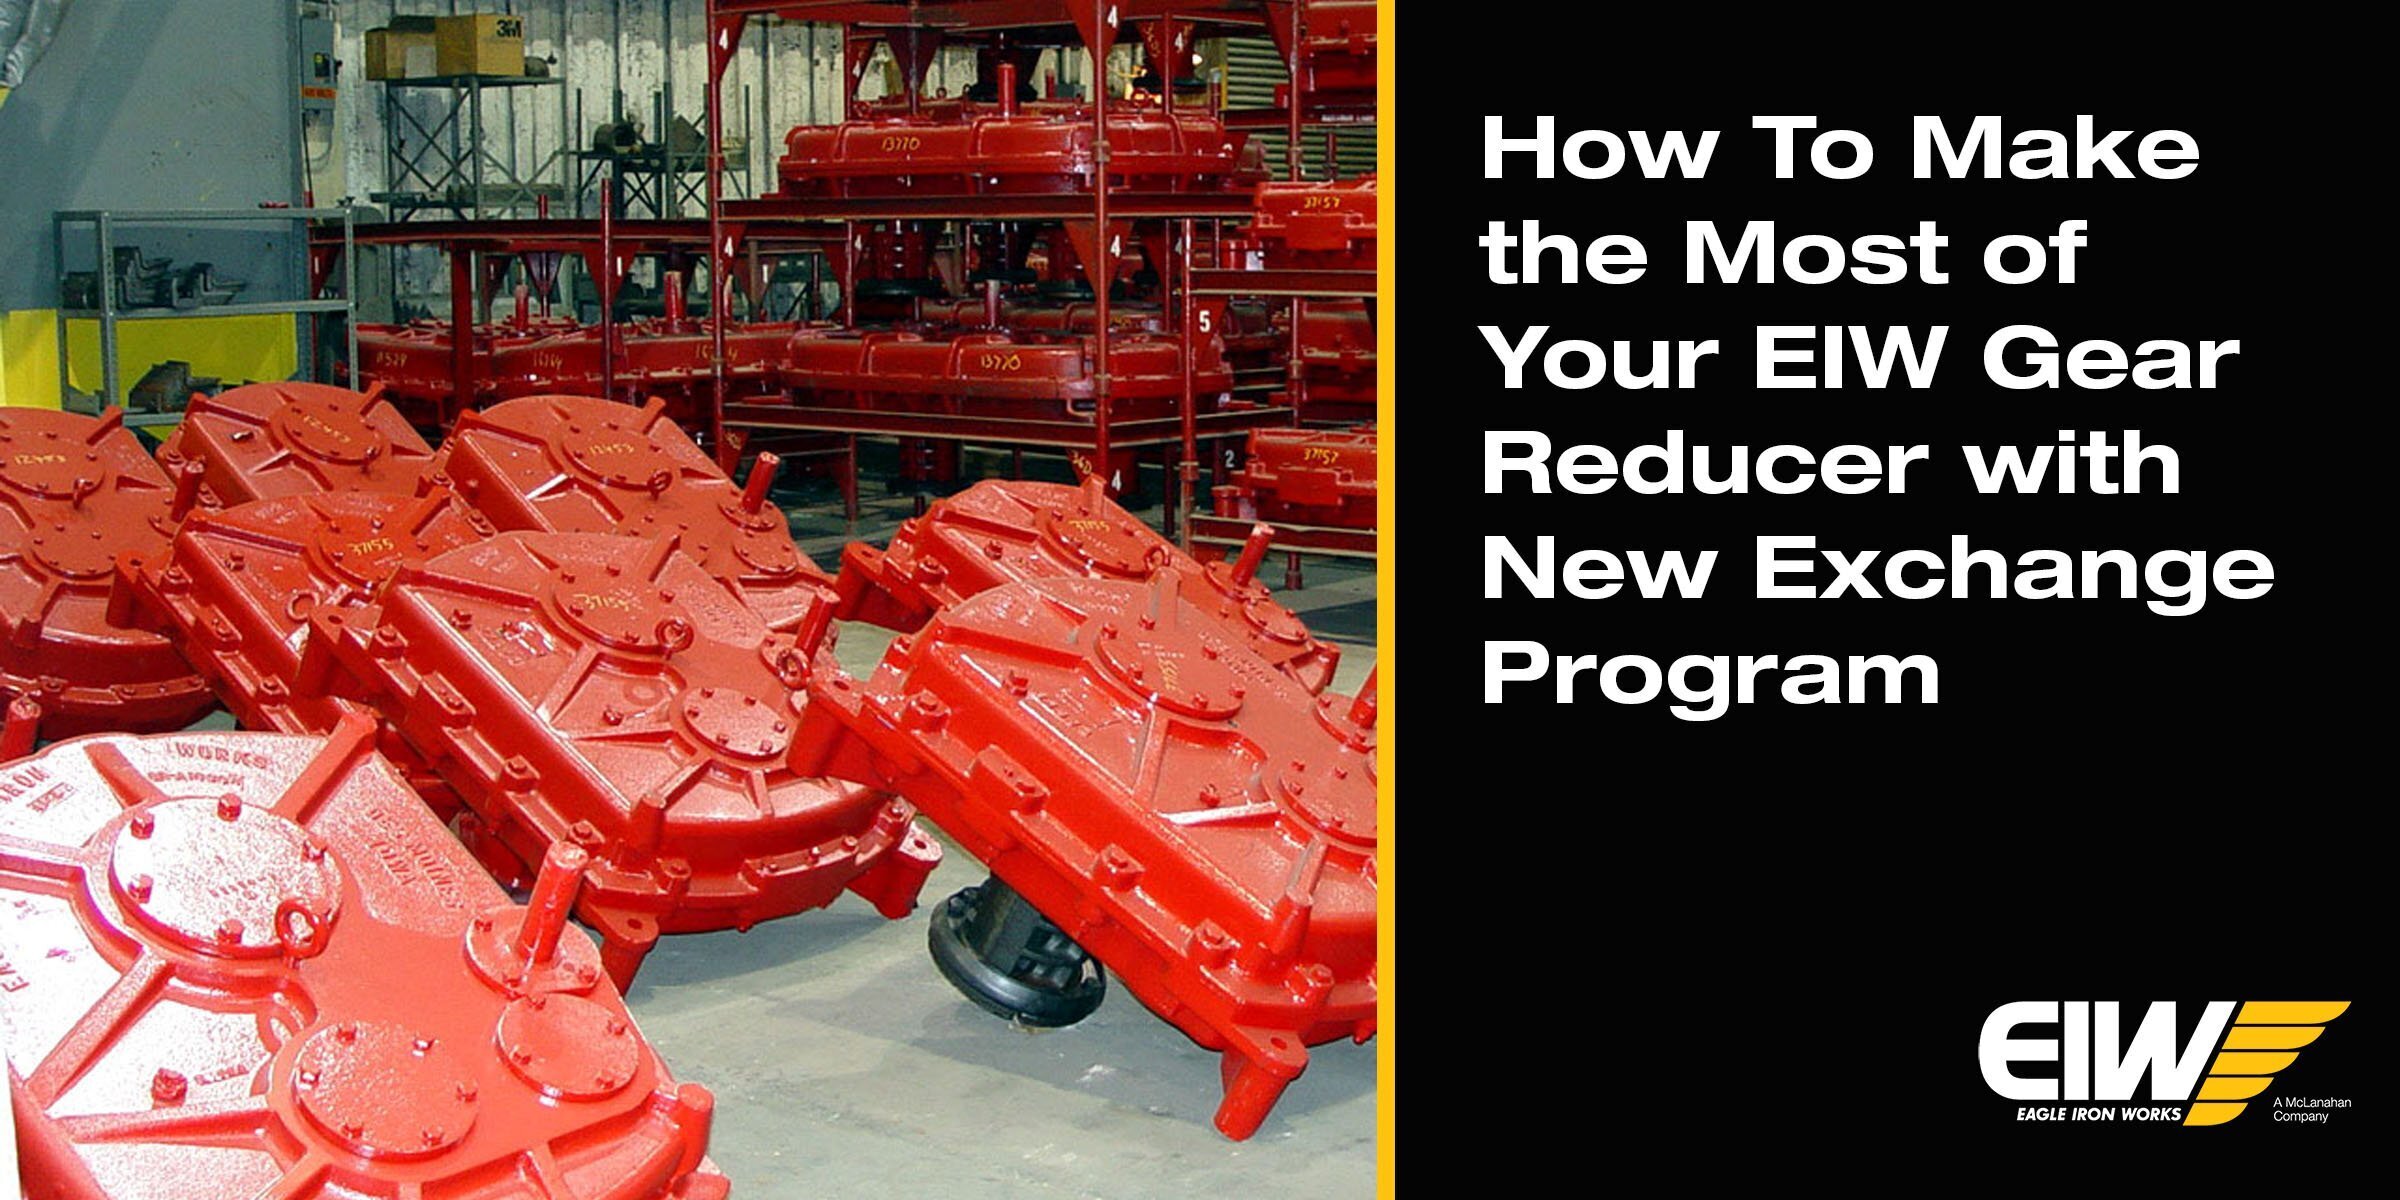 How to make the most of your EIW Gear Reducer with New Exchange Program